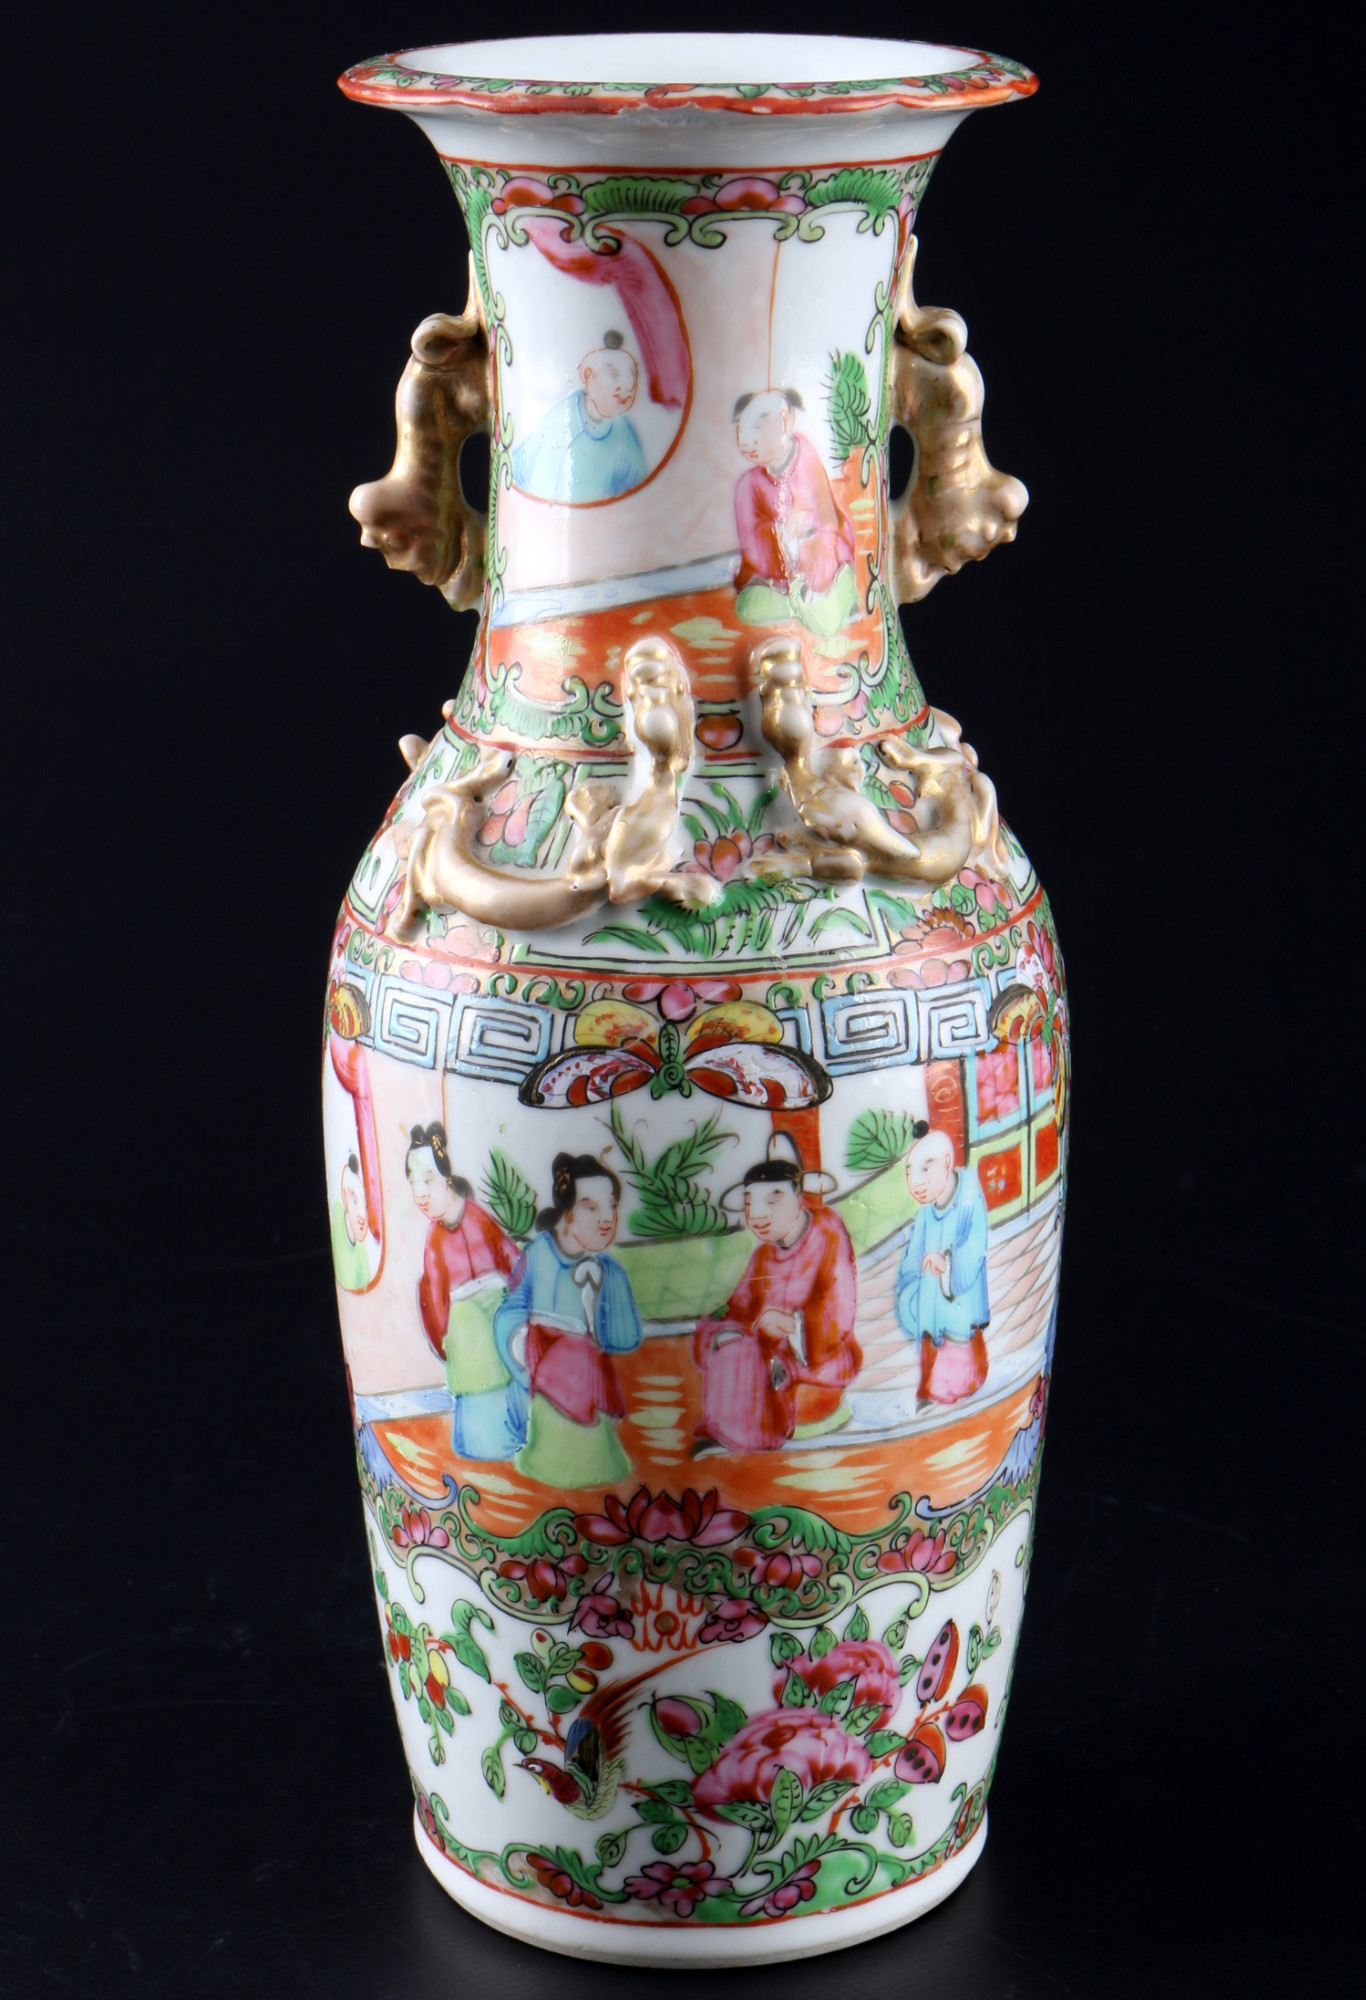 China family rose vase in Guangdong style, 19th century,